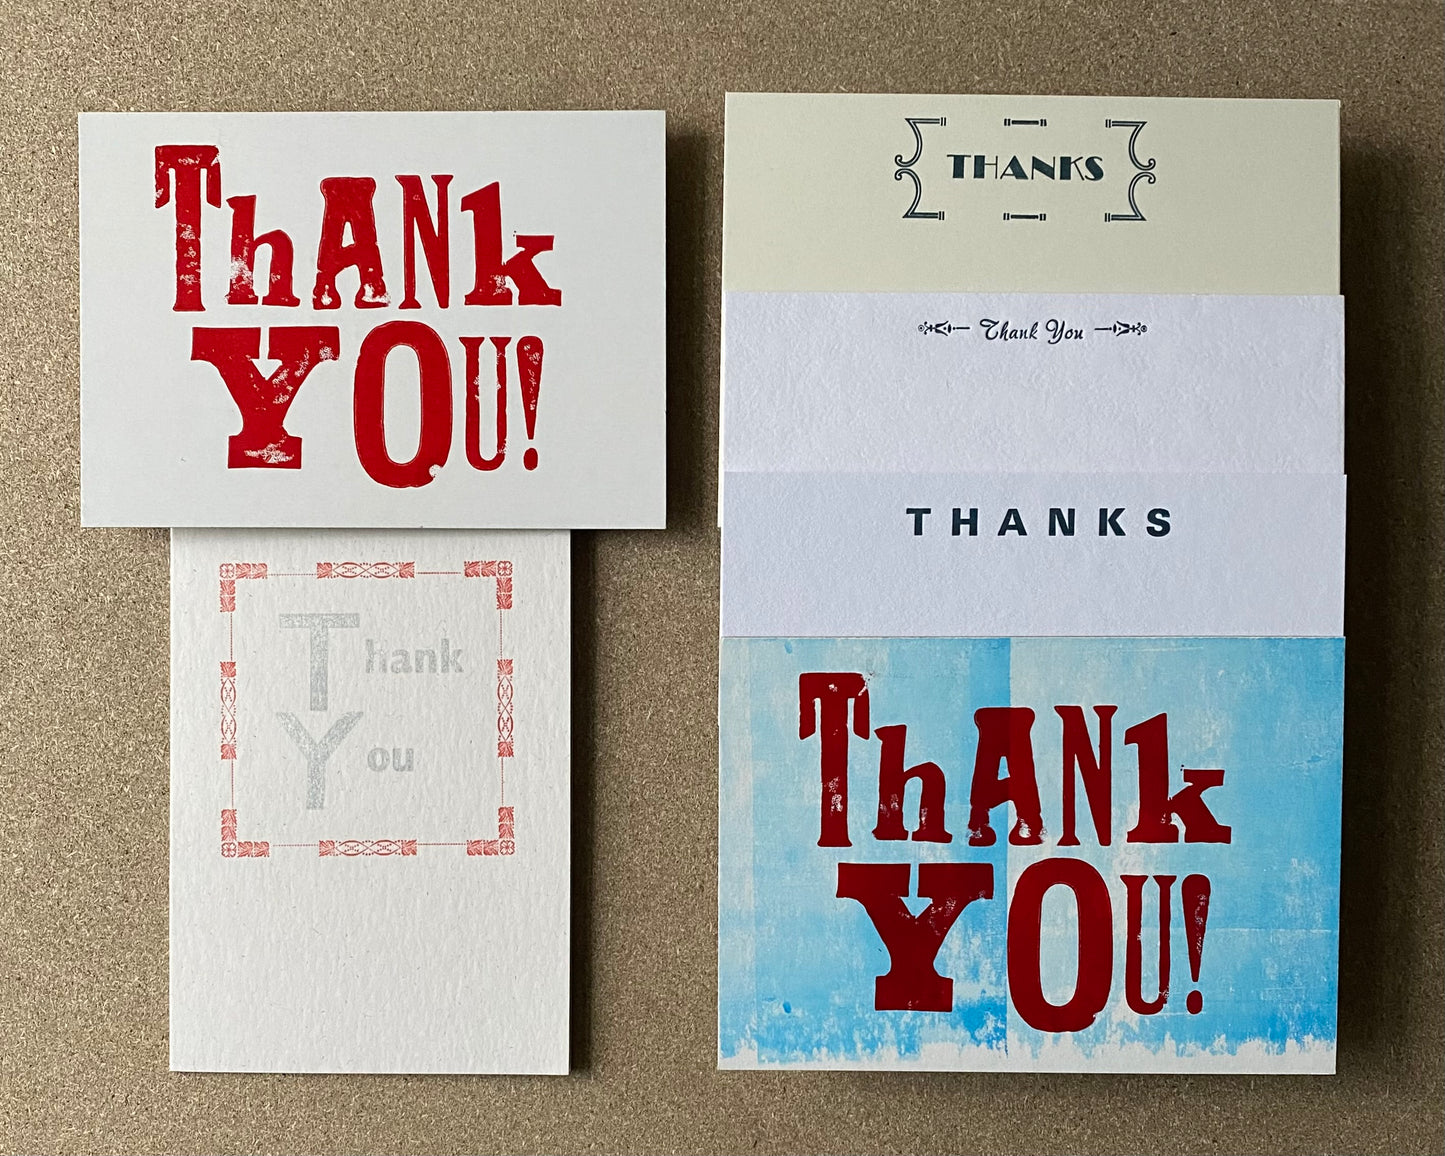 Load image into Gallery viewer, Thank you cards - printed with metal and wood type
